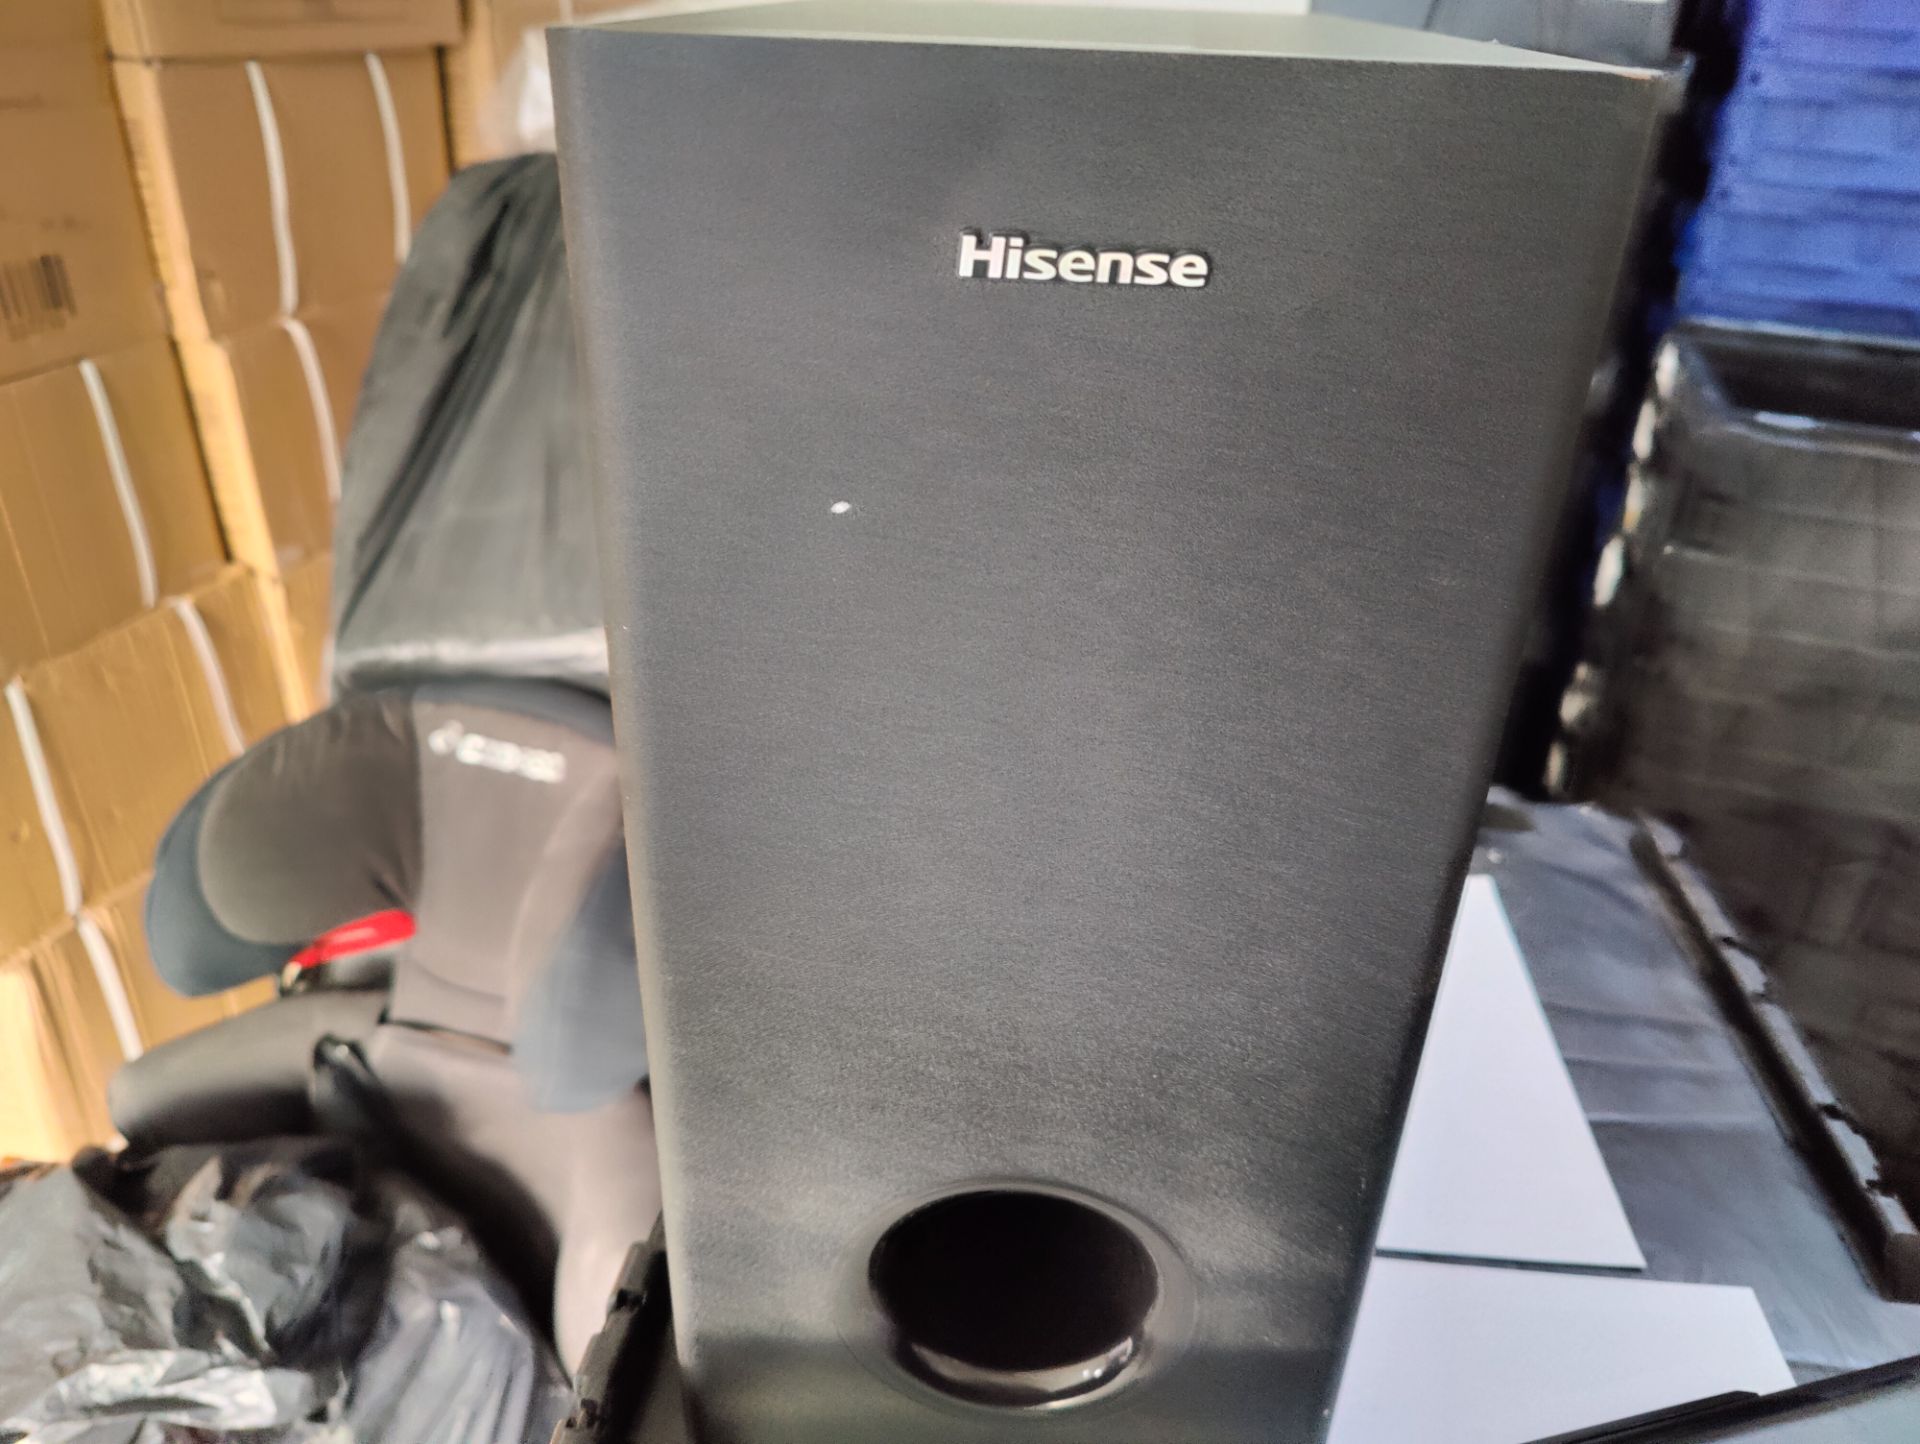 Hisense 2.1CH Sound Bar With Wireless Subwoofer - Image 2 of 3